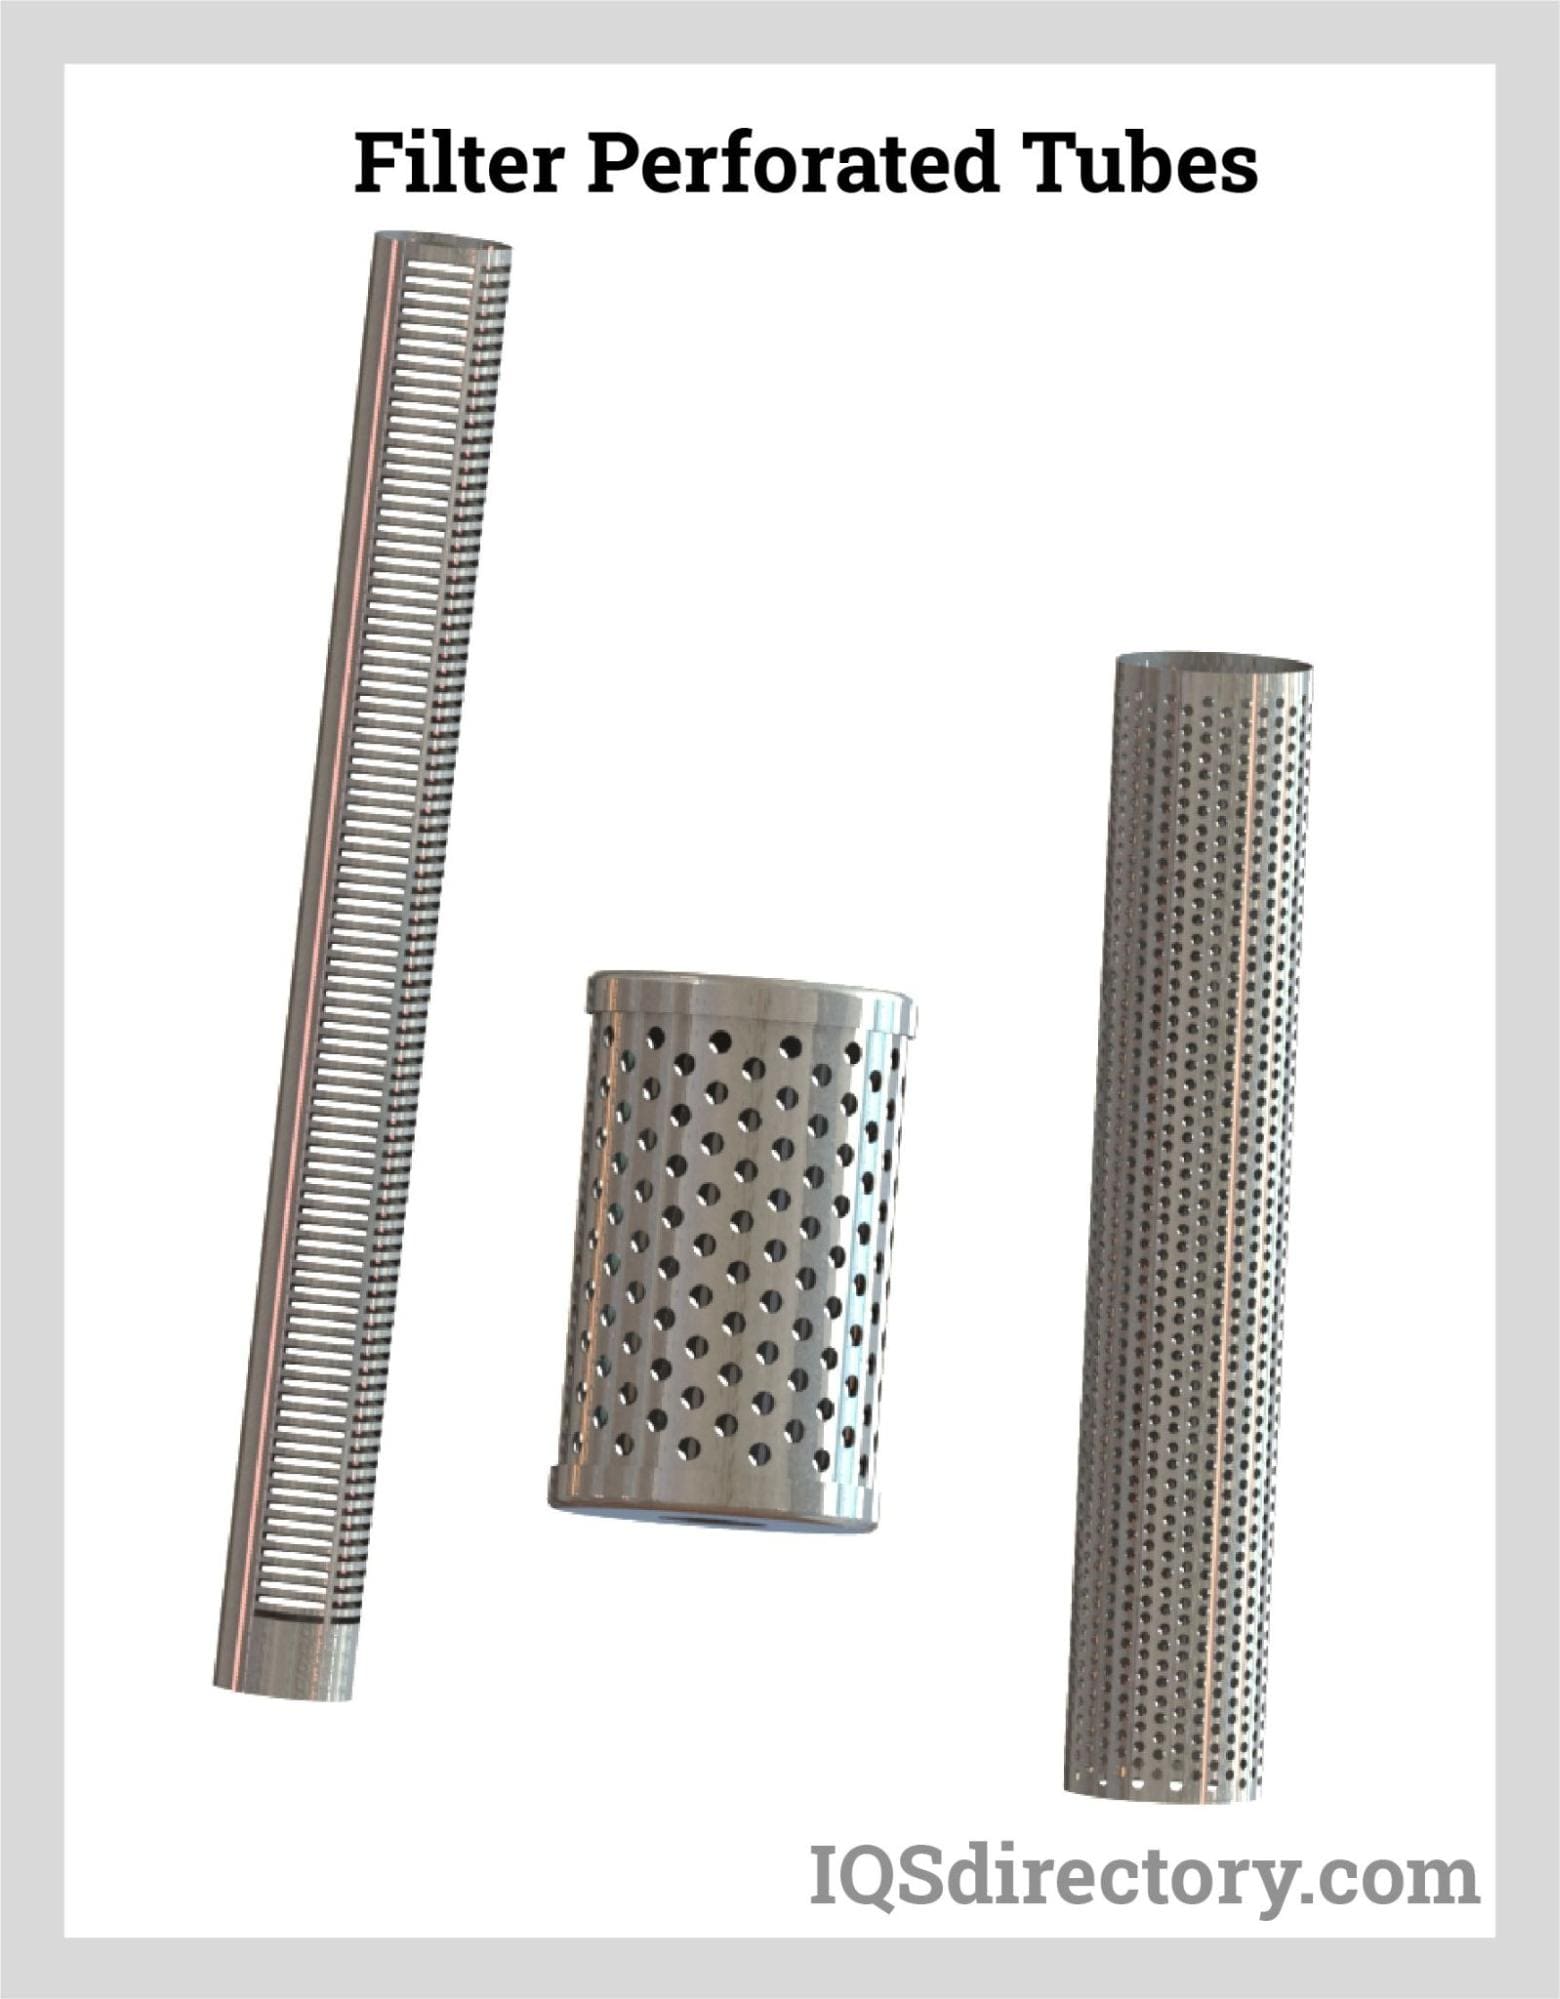 Filter Perforated Tubes